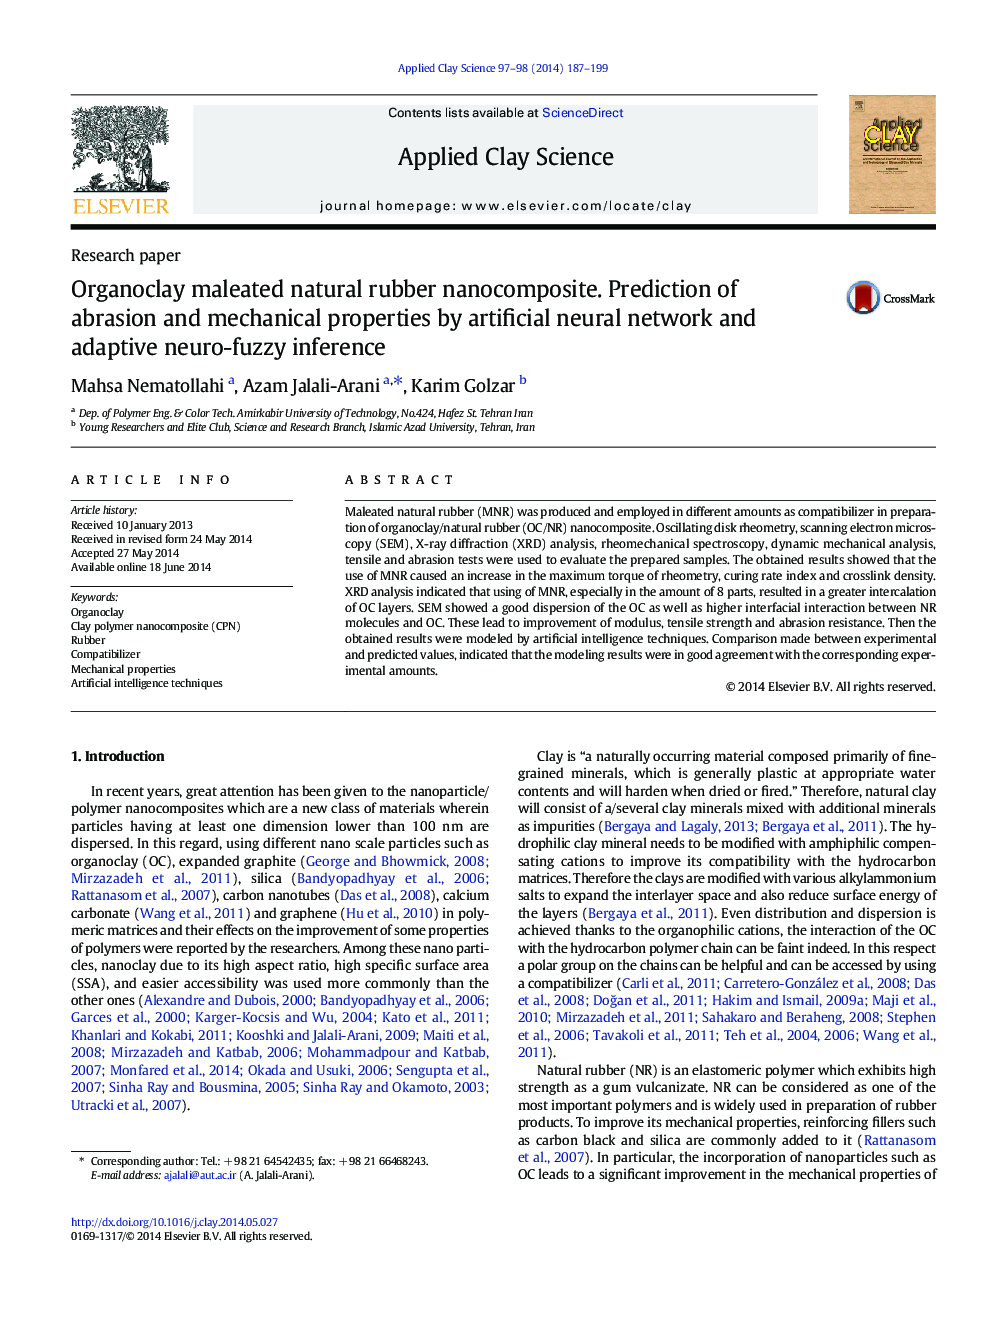 Organoclay maleated natural rubber nanocomposite. Prediction of abrasion and mechanical properties by artificial neural network and adaptive neuro-fuzzy inference